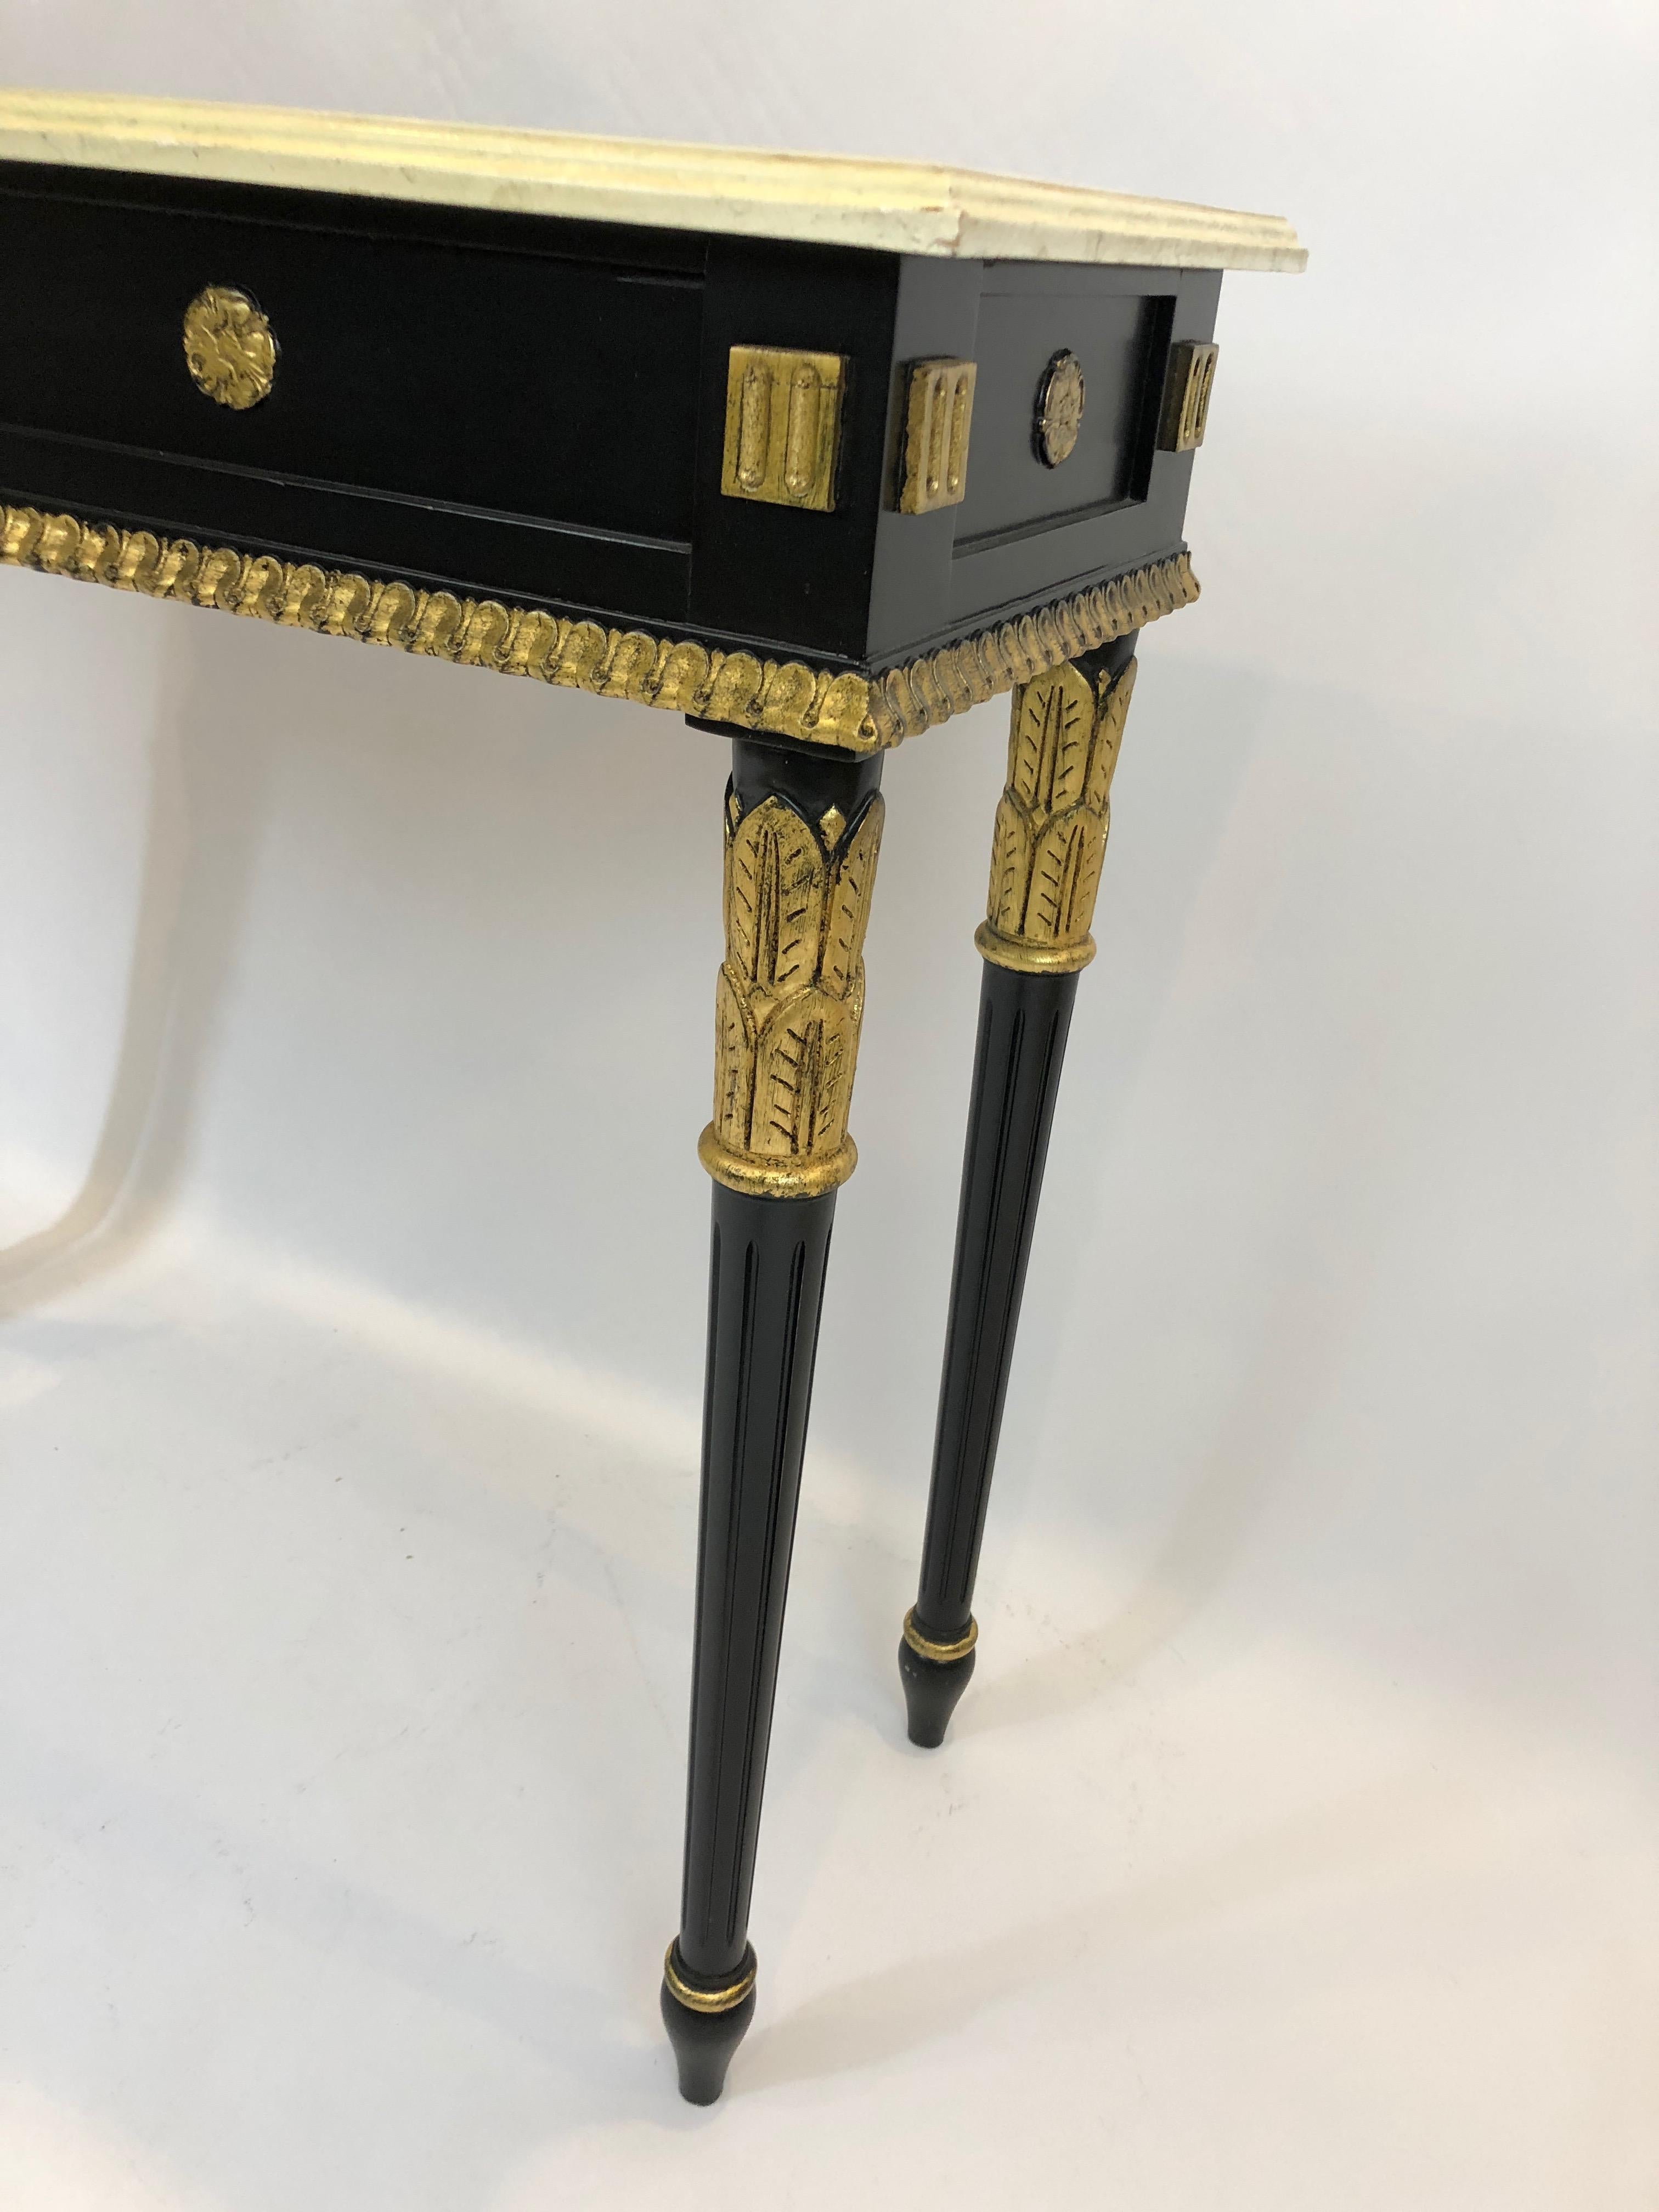 American Glamorous Regency Style Black and Gilded Console Table with Faux Marble Top